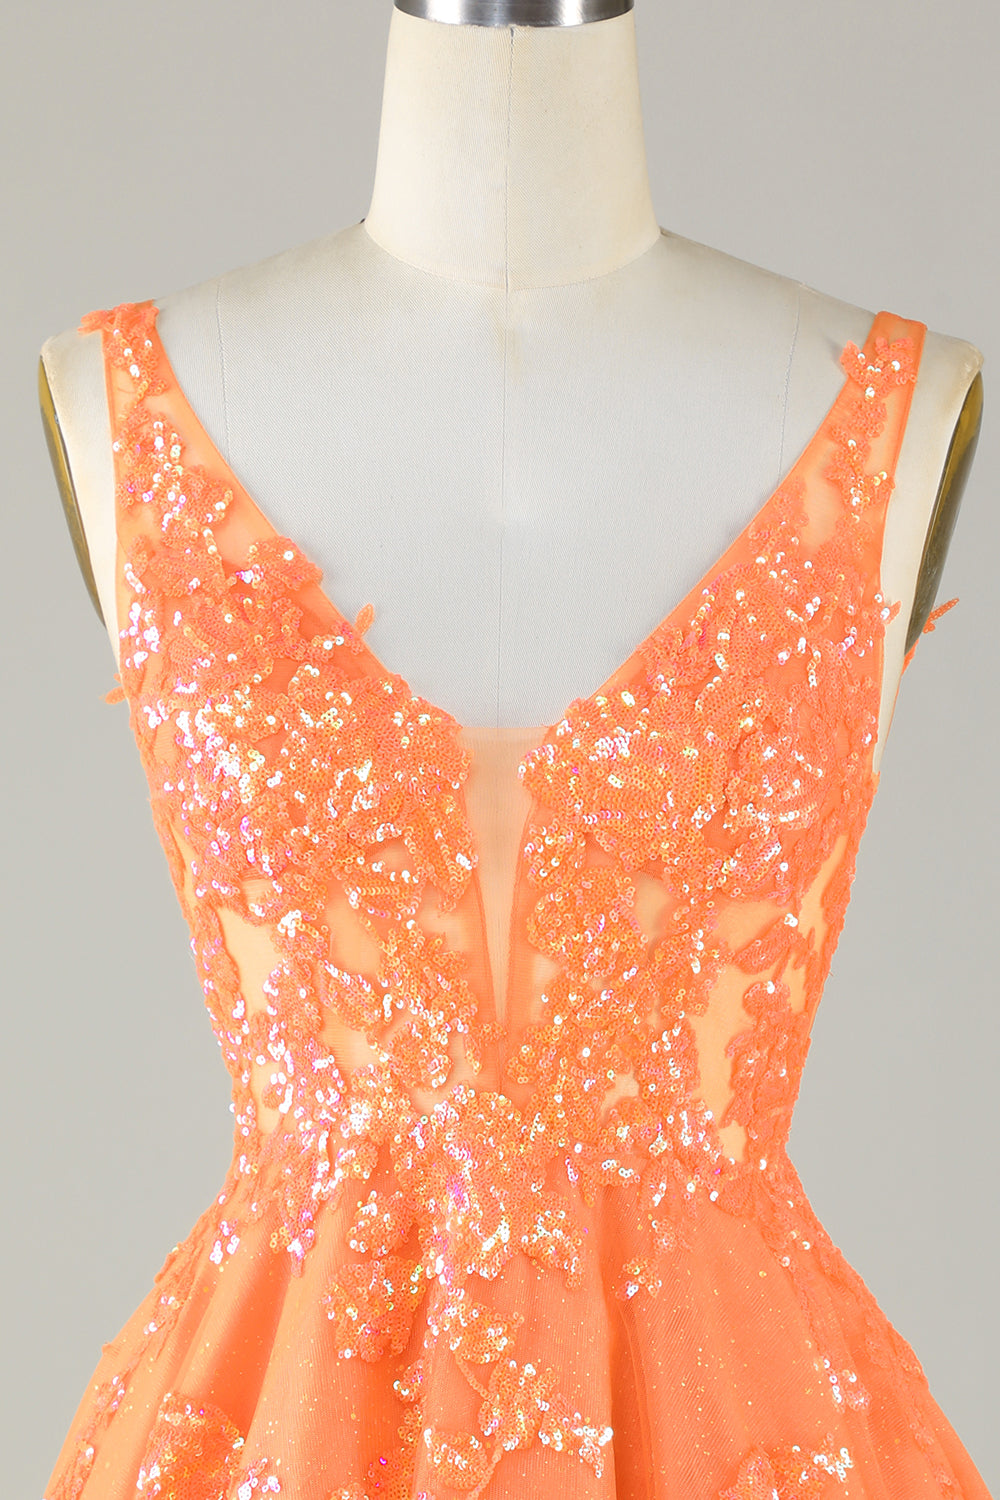 Sparkly Orange A Line Glitter Homecoming Dress with Sequins